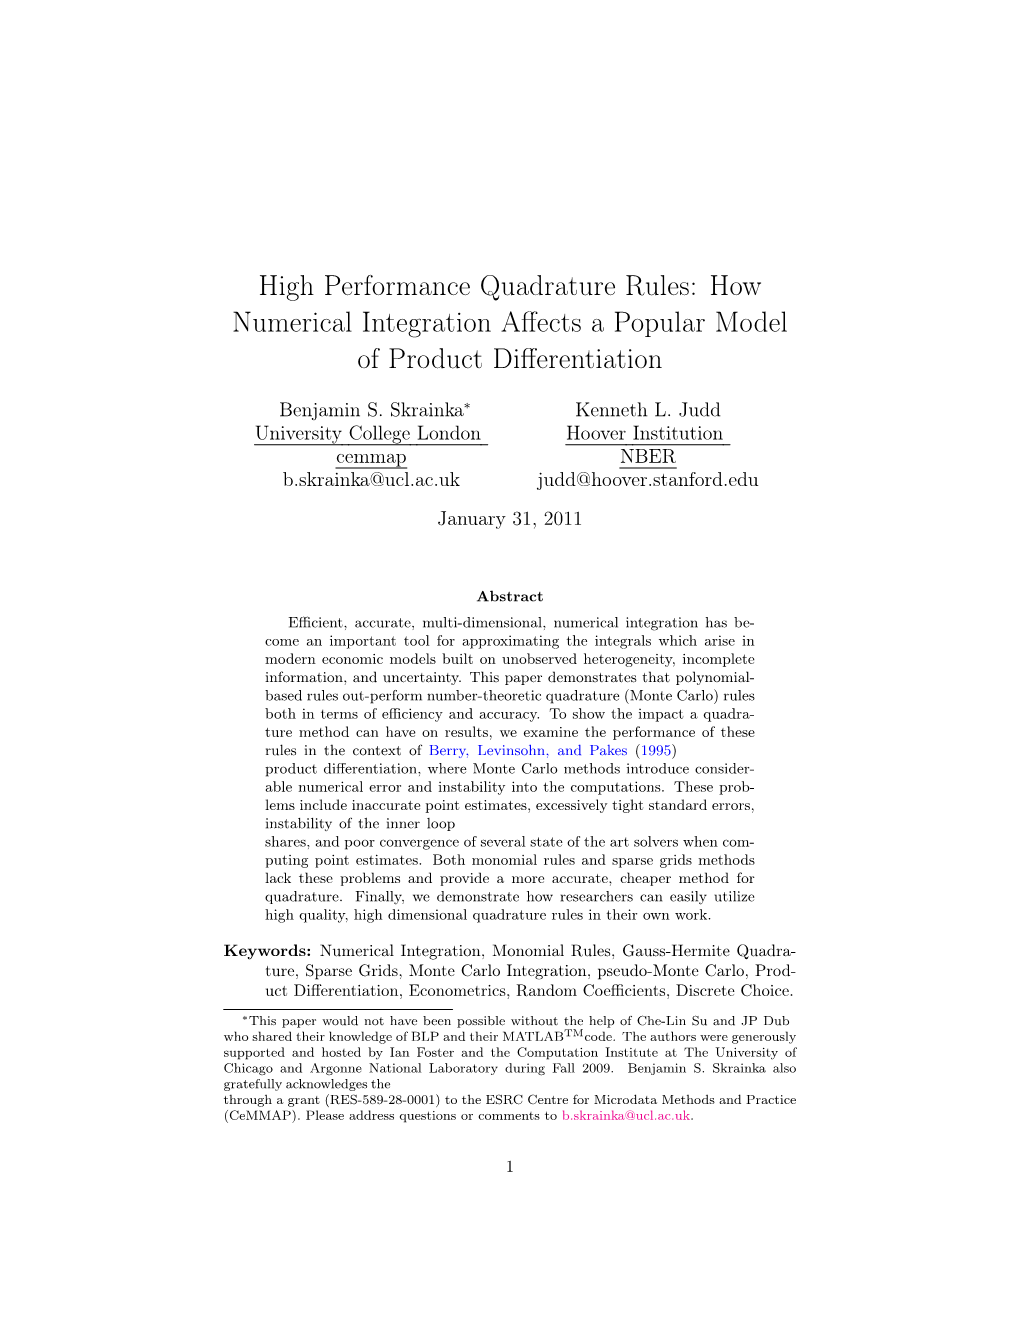 High Performance Quadrature Rules: How Numerical Integration Affects A